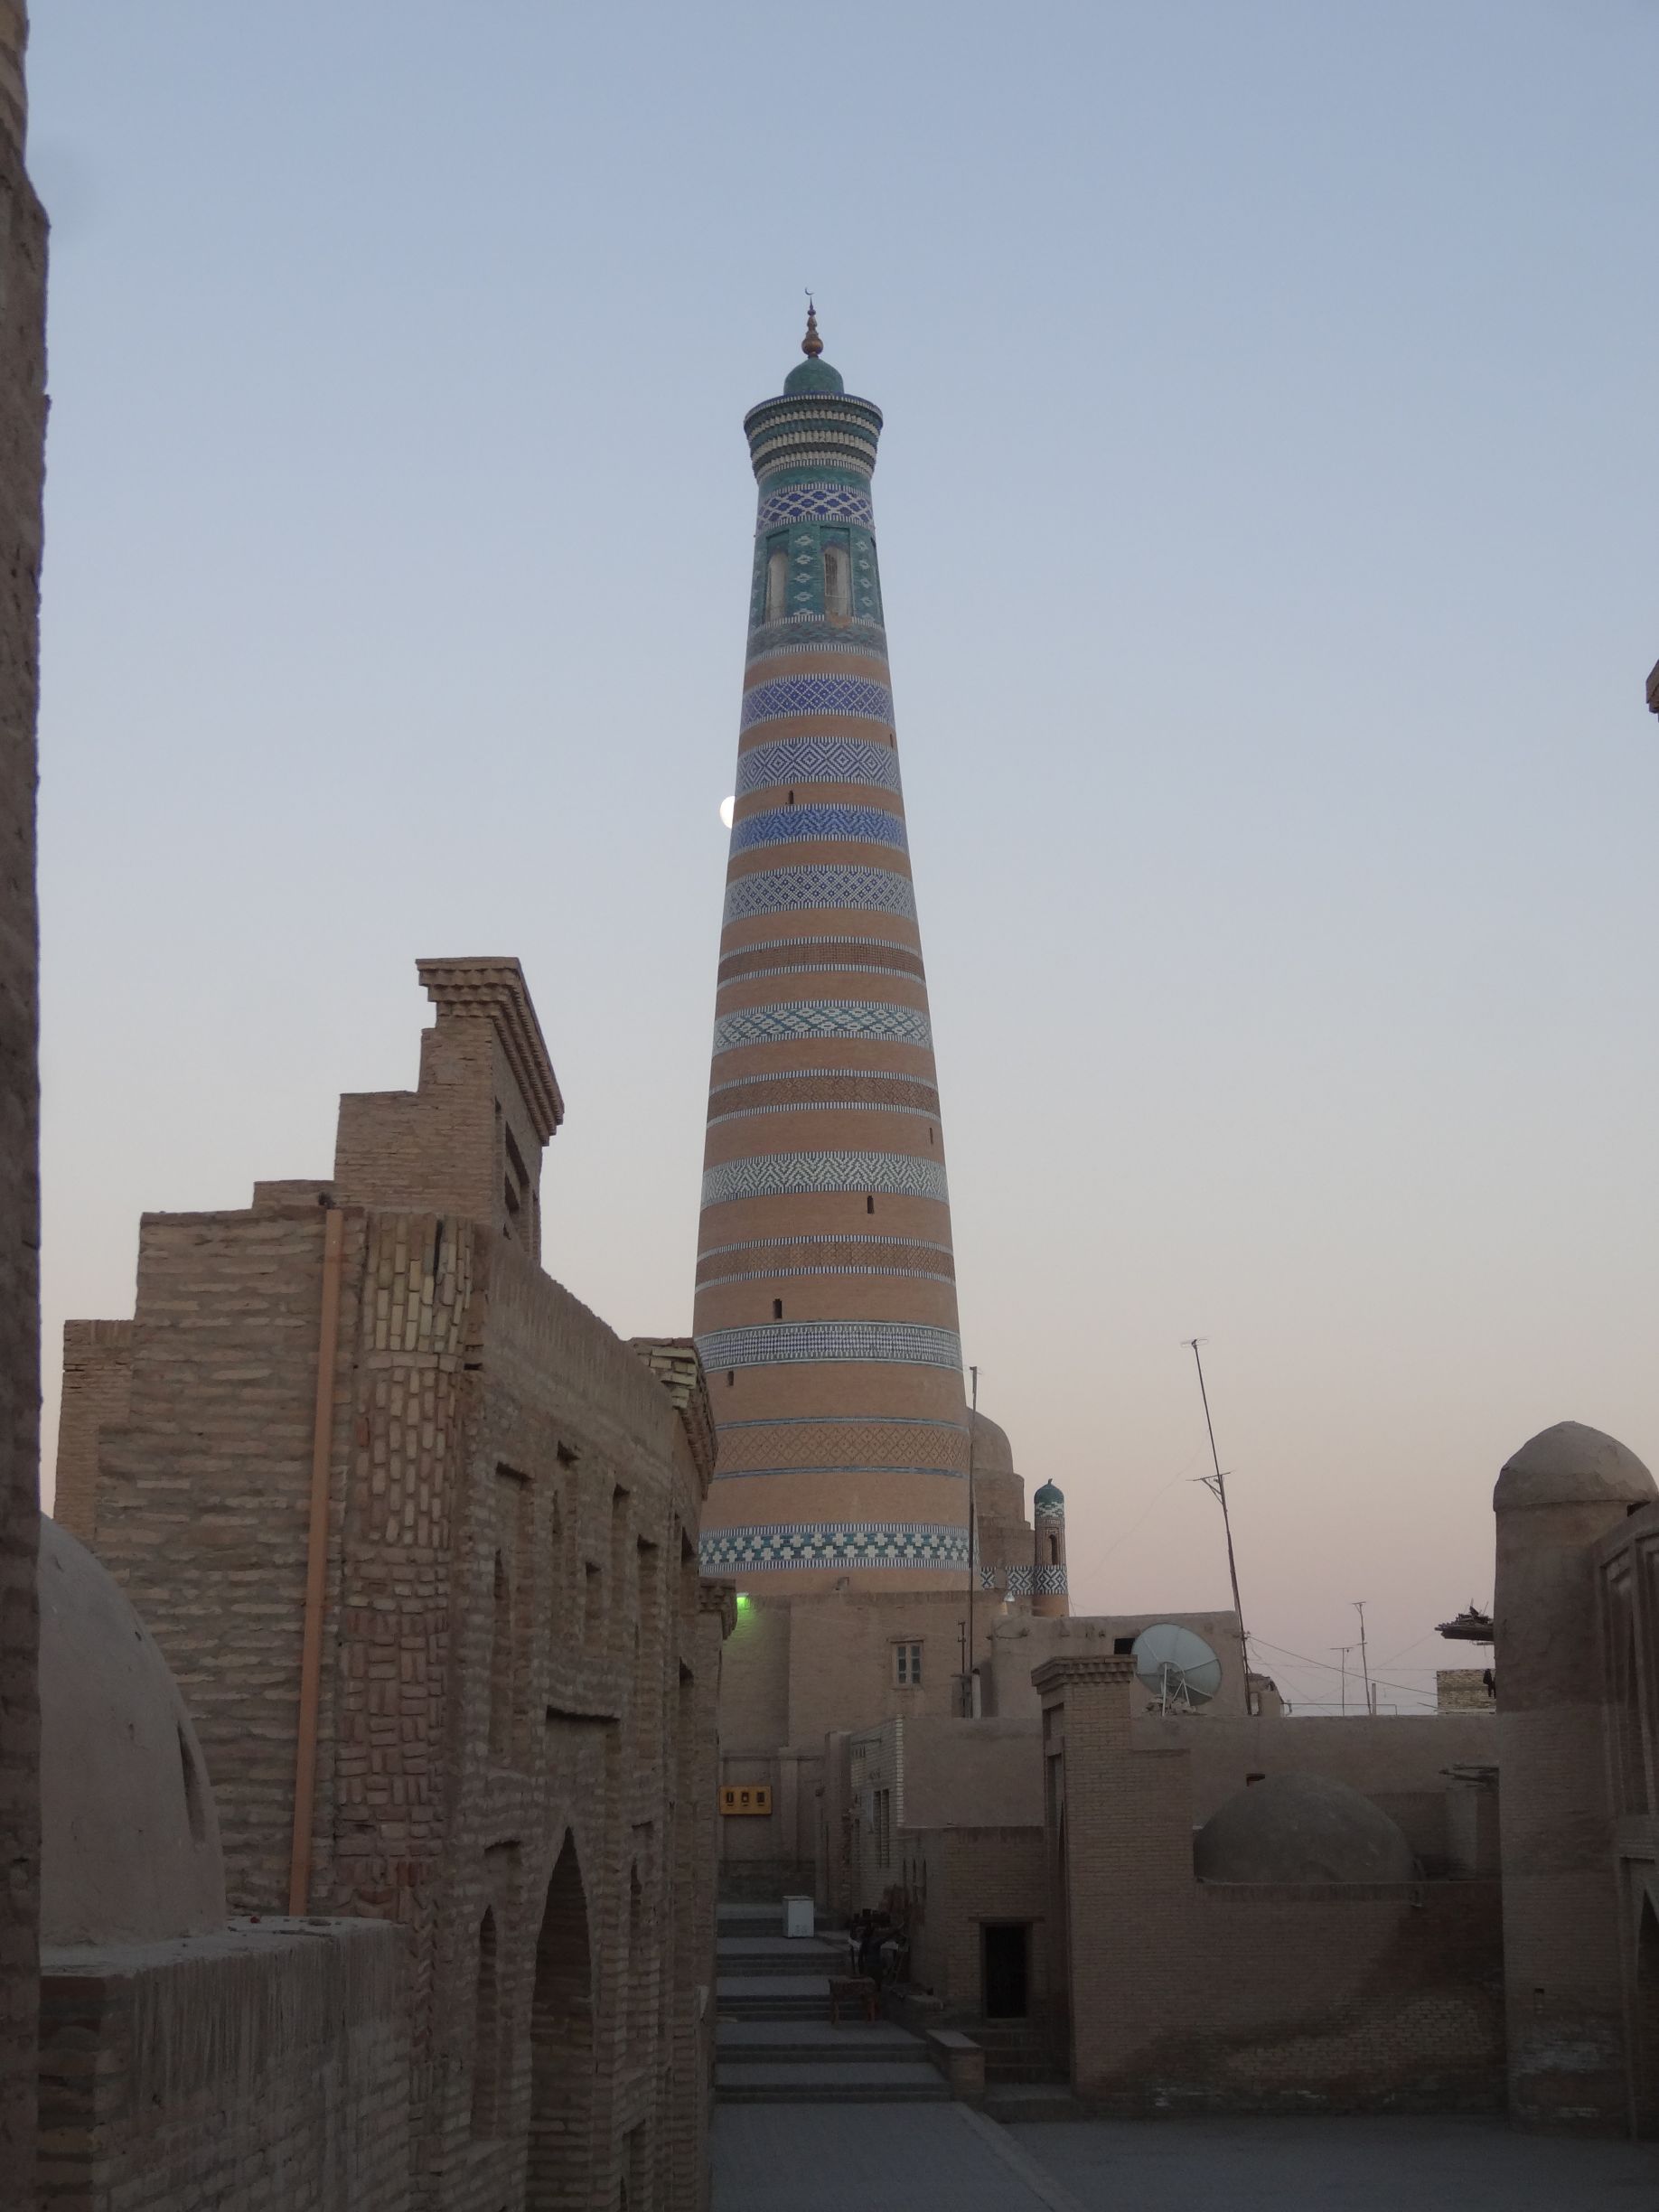 the Islom-Hoja minaret in Khiva, the newbies in town dating only from 1910